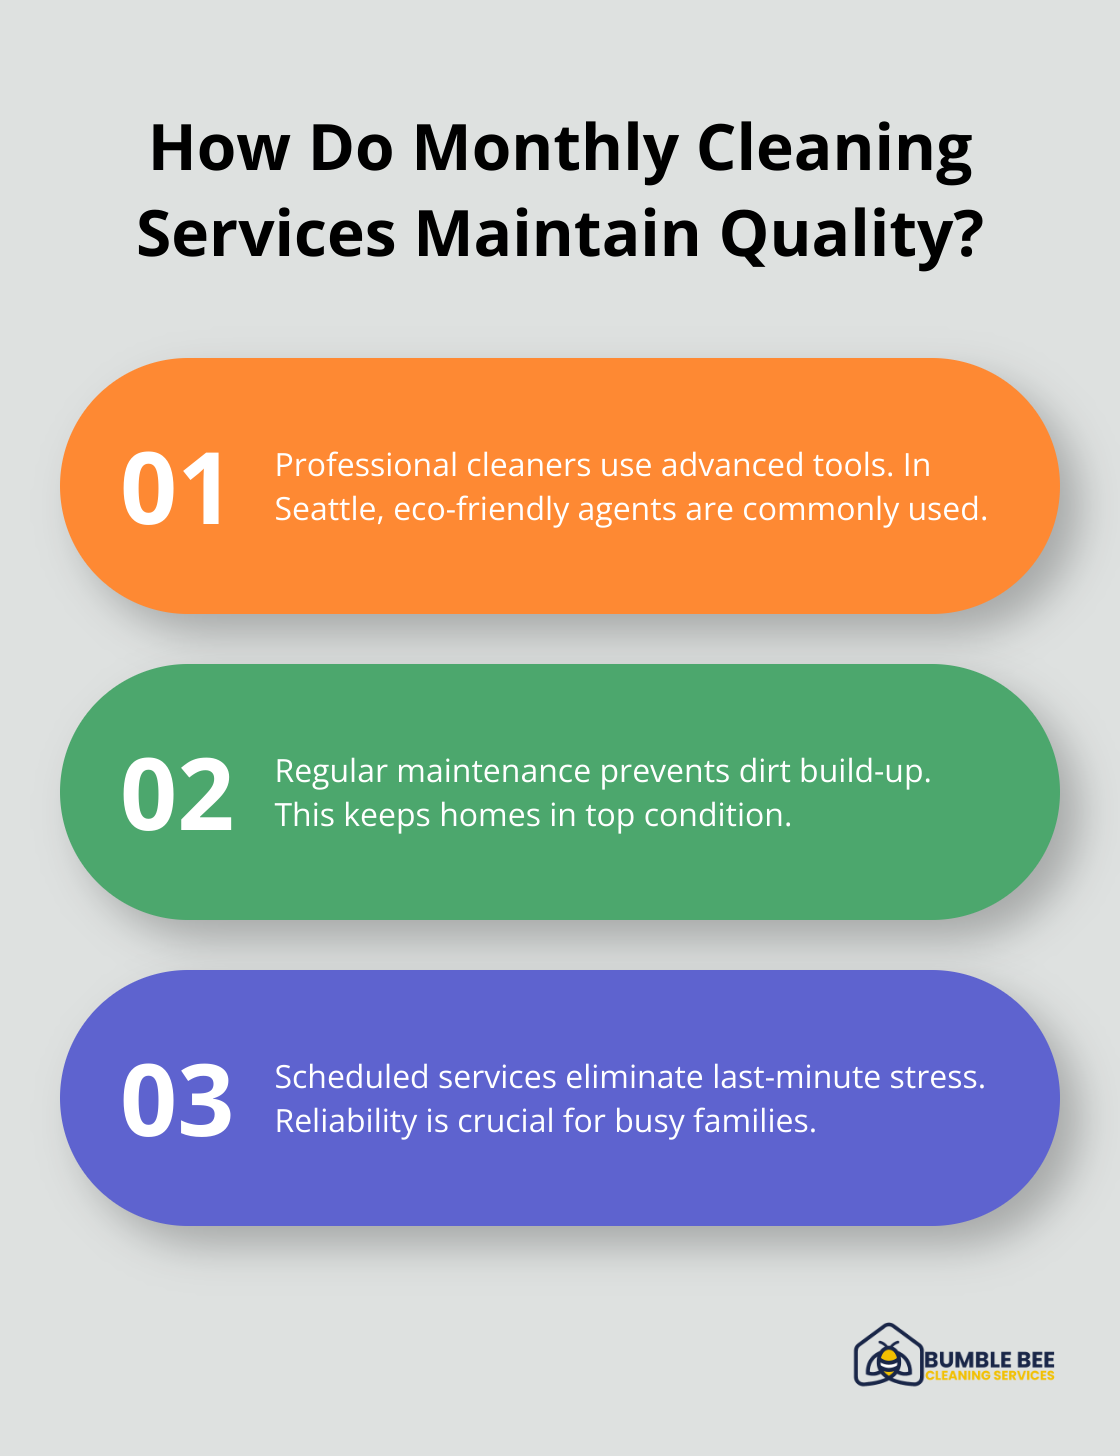 Fact - How Do Monthly Cleaning Services Maintain Quality?